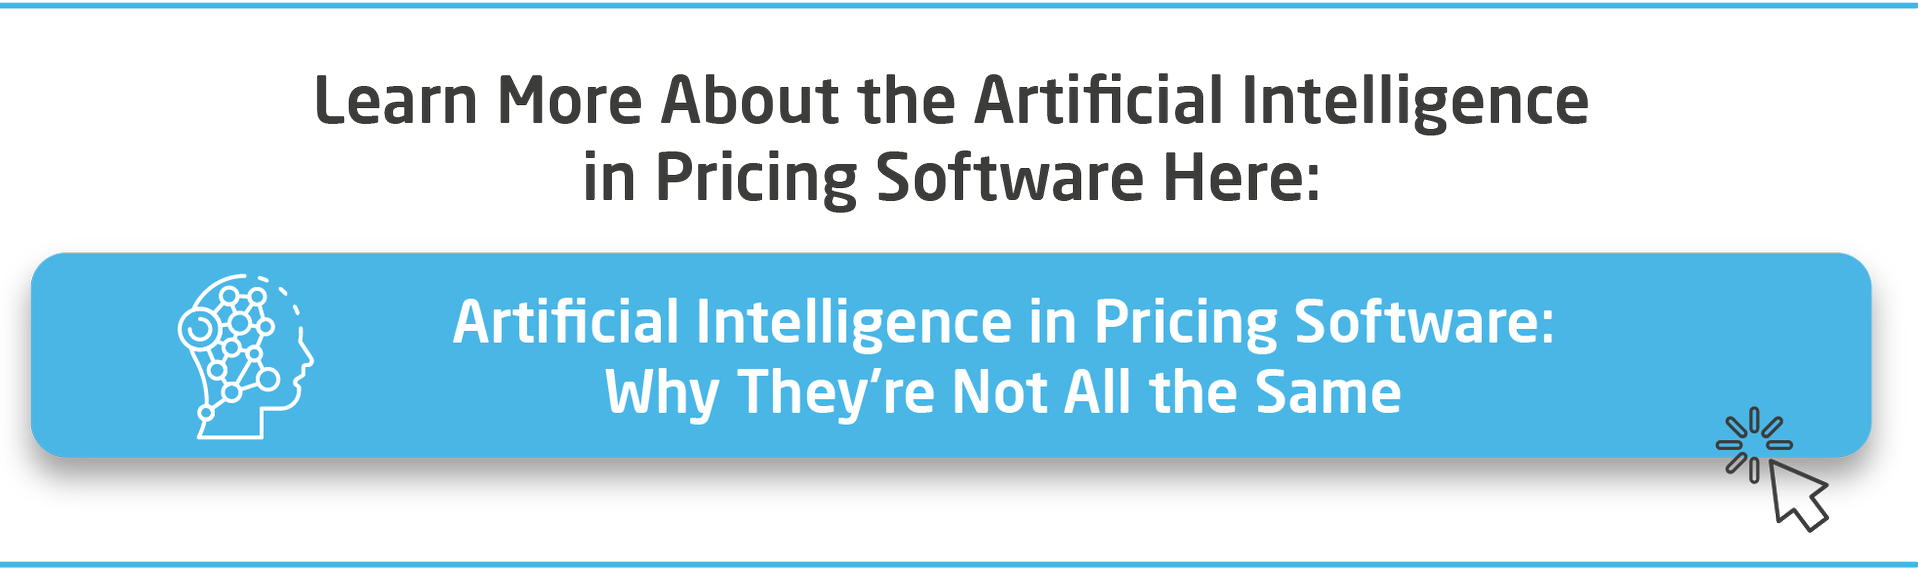 CTA-AI-Pricing-Software-Why-They-Are-Not-All-the-Same